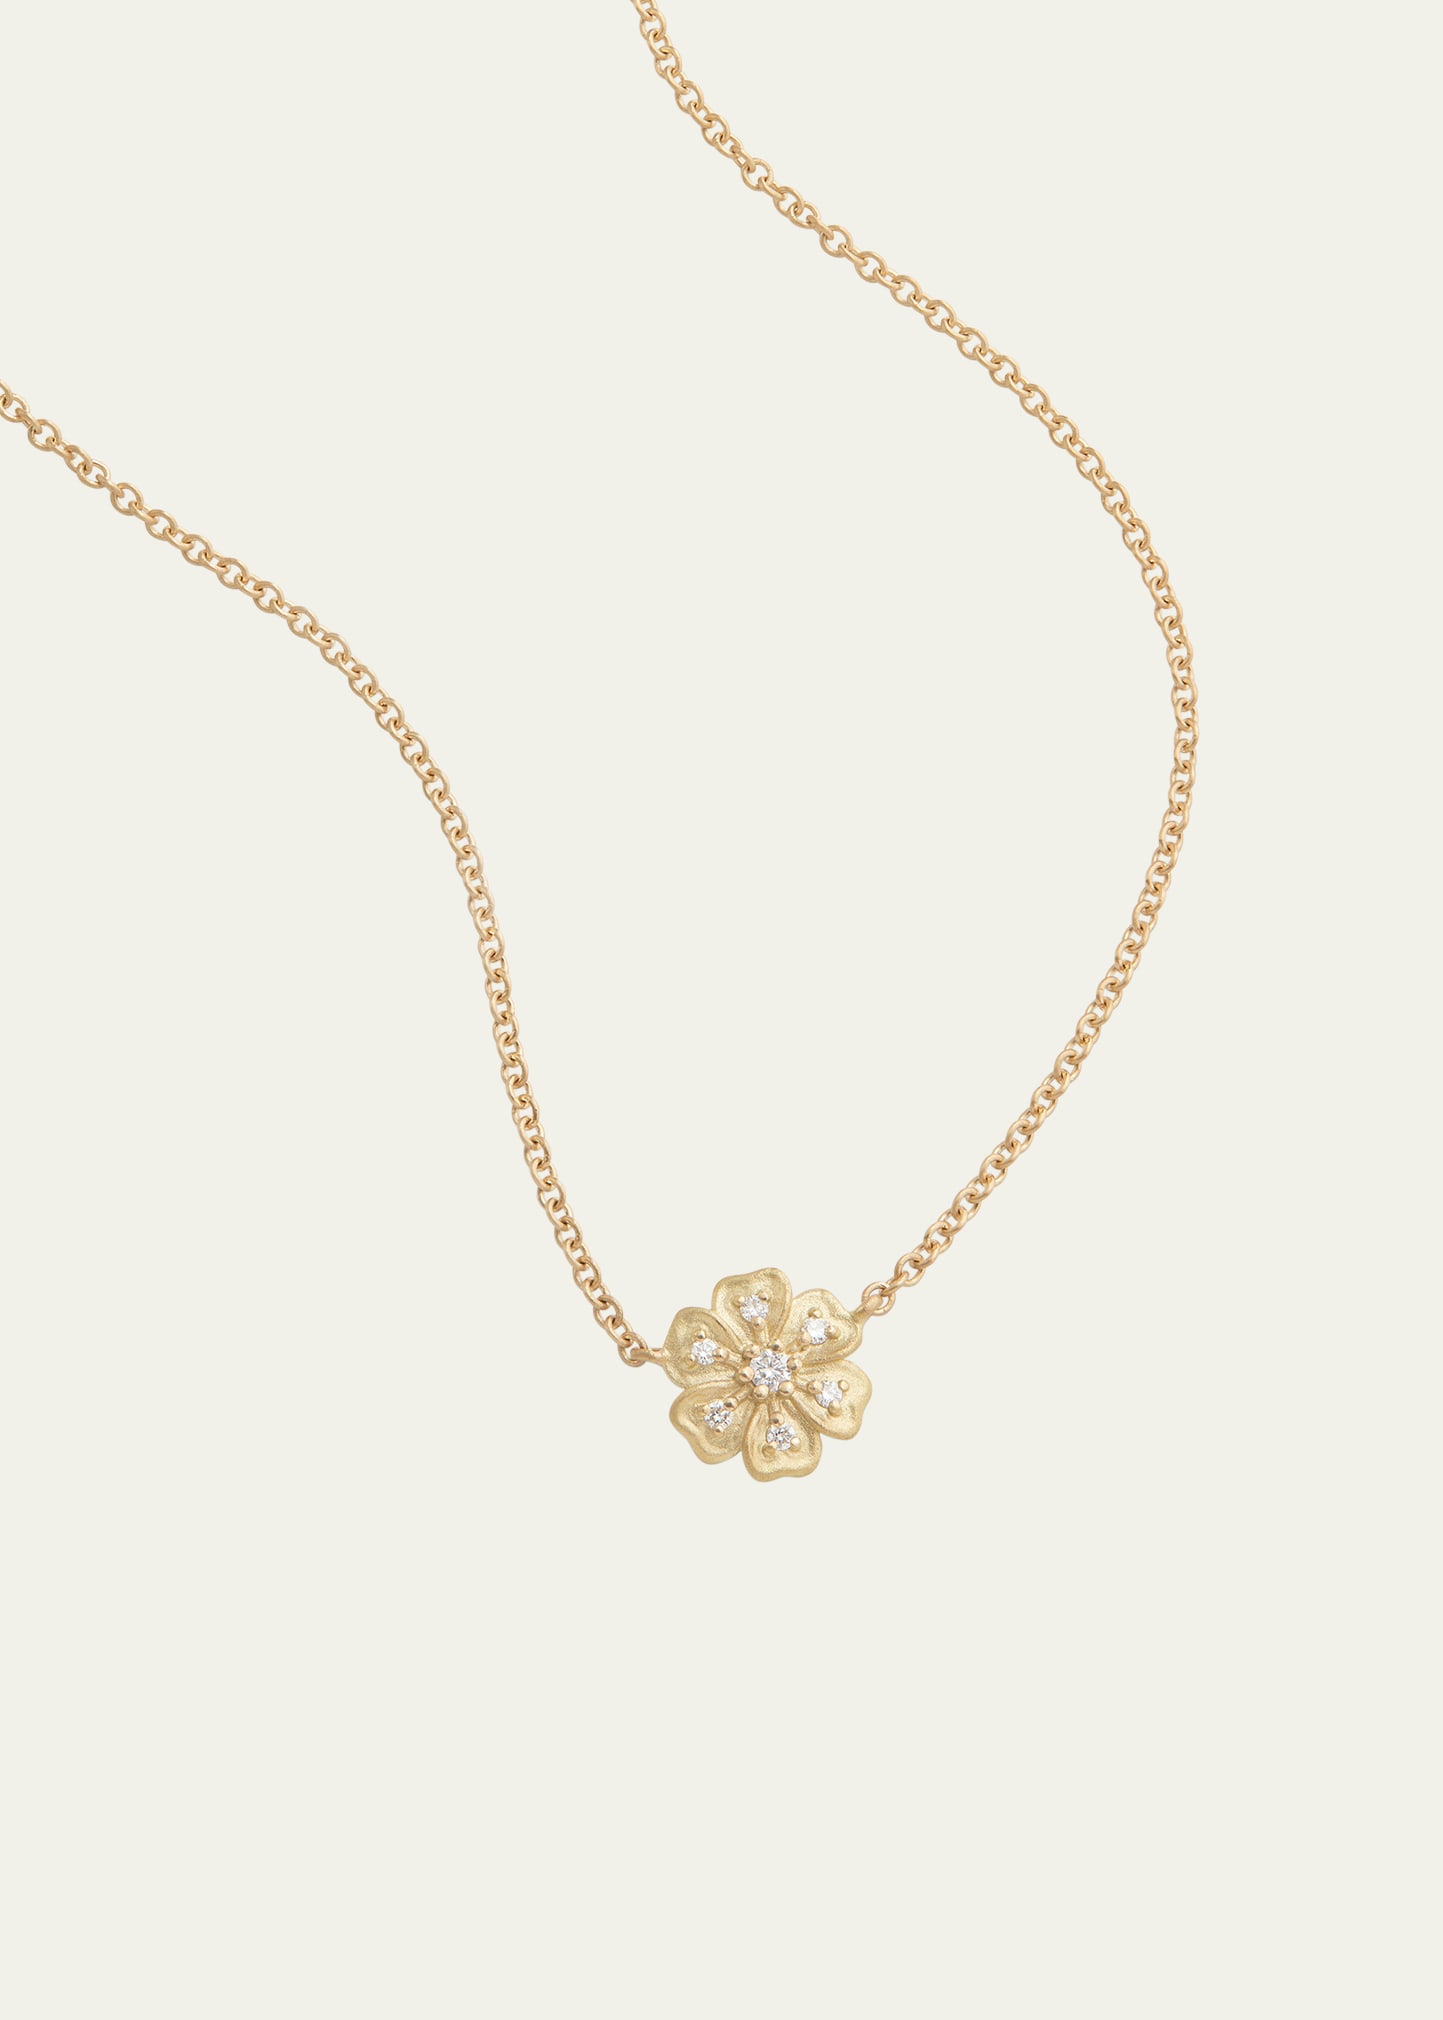 Jamie Wolf 18k Yellow Gold Floral Pendant Necklace With Diamonds In Yg